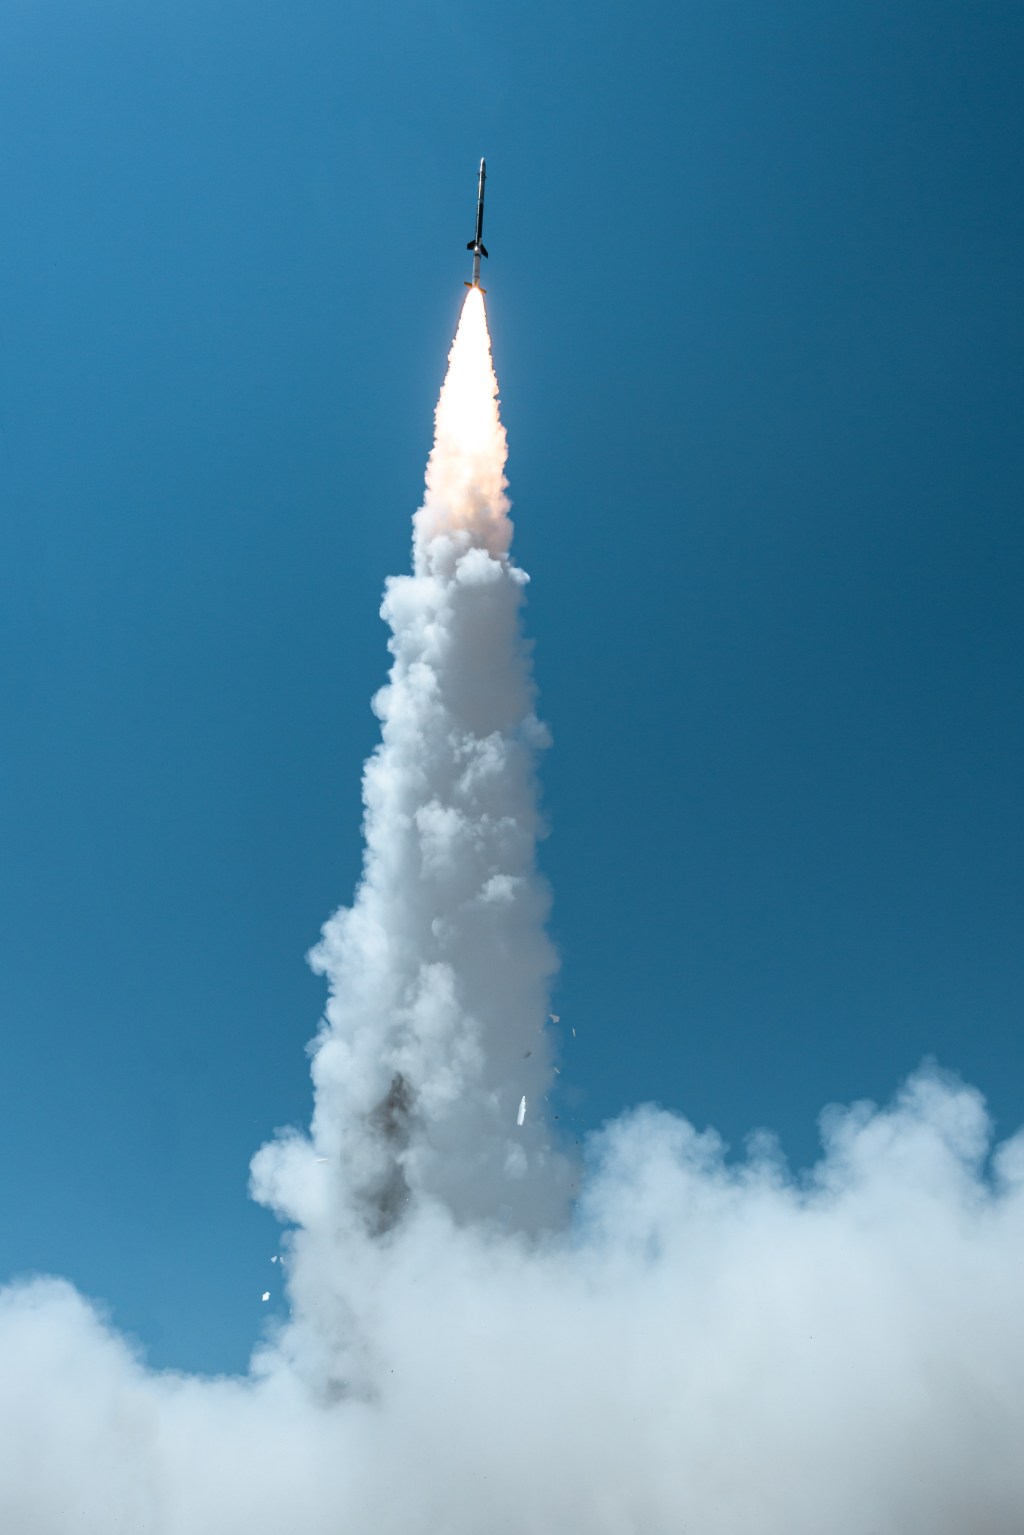 A sounding rocket launches into a bright blue sky leaving a plume of smoke behind.